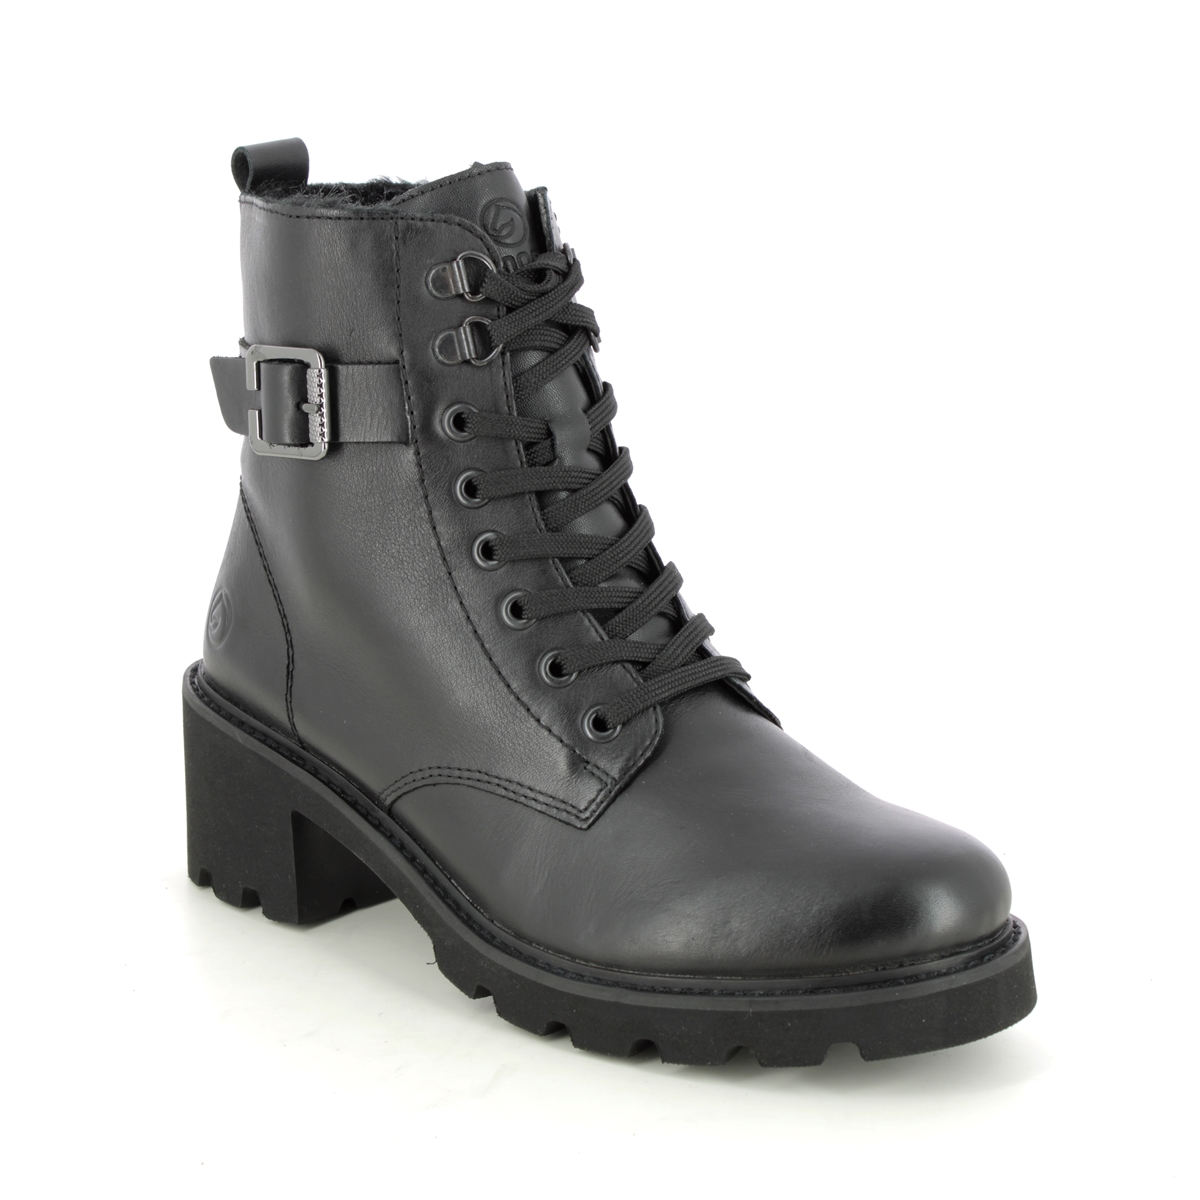 Remonte Bodola Black Leather Womens Lace Up Boots D0A74-01 In Size 41 In Plain Black Leather